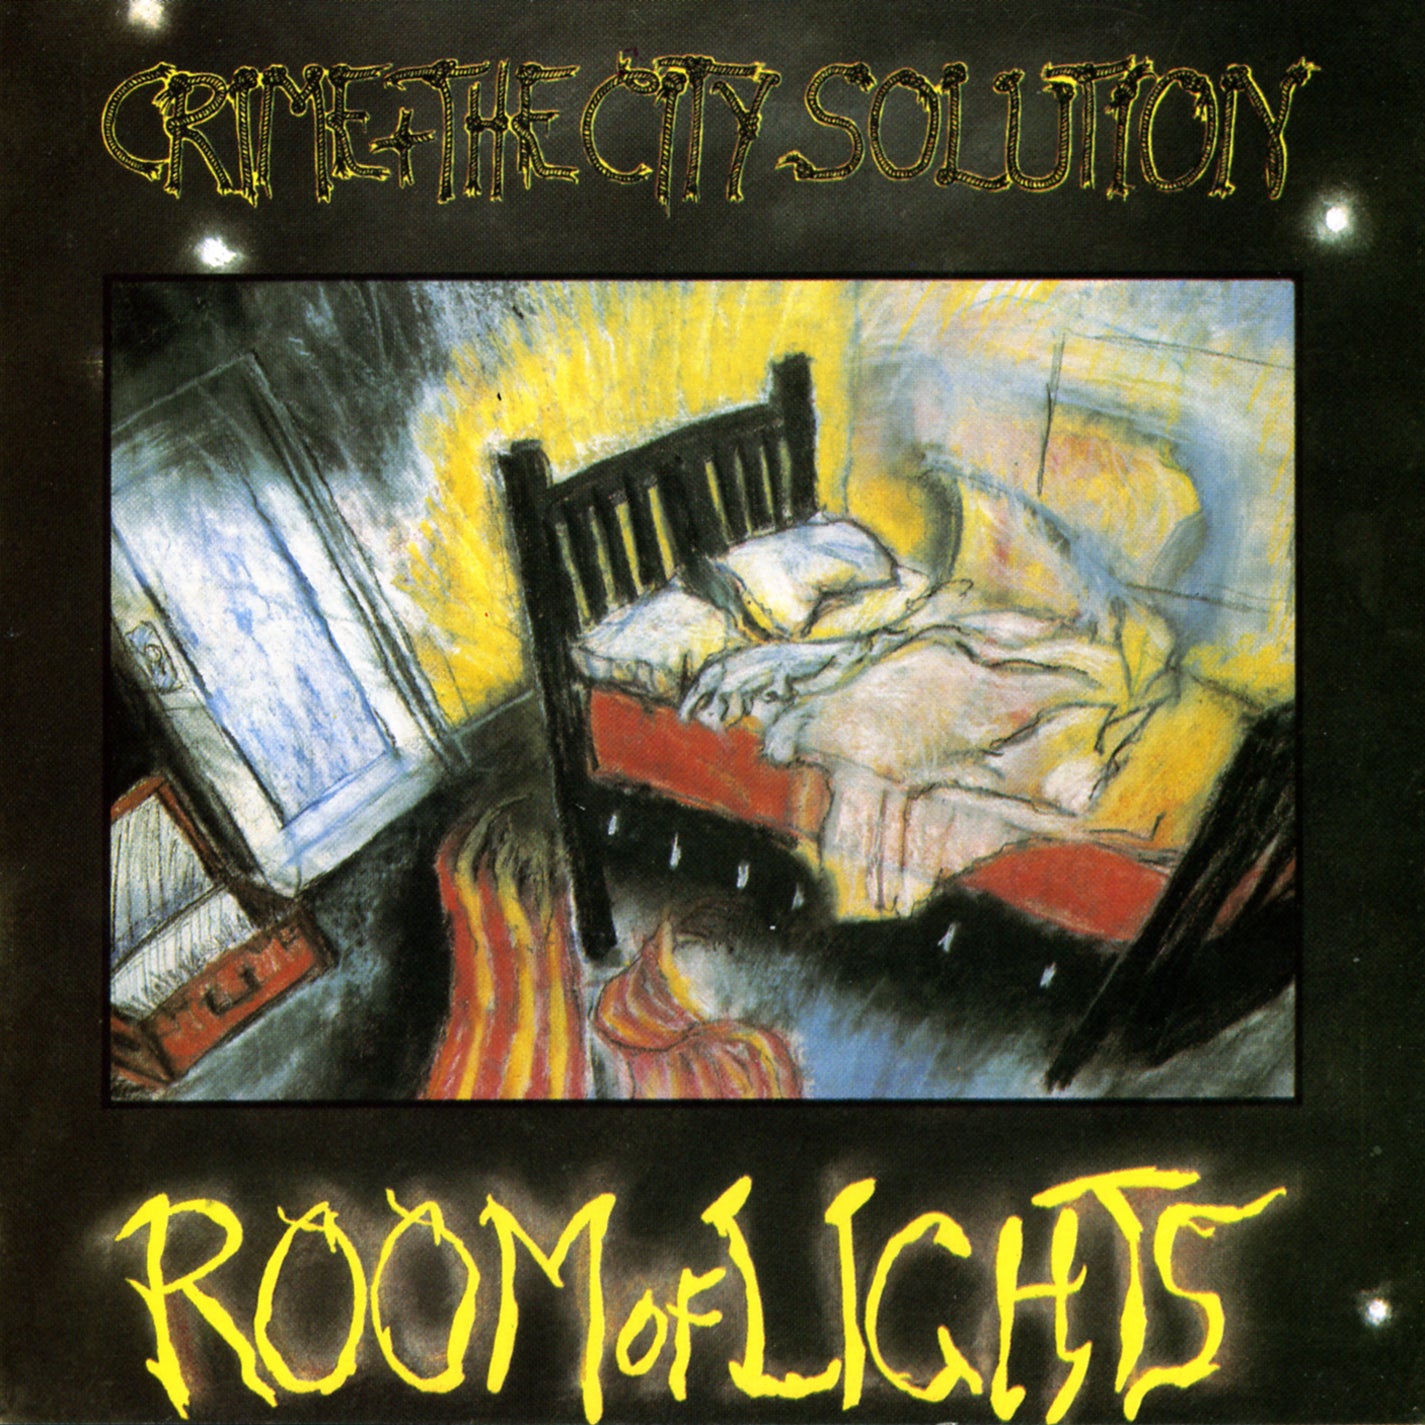 PRE-ORDER: Crime & the City Solution "Room Of Lights" LP (Yellow Vinyl)